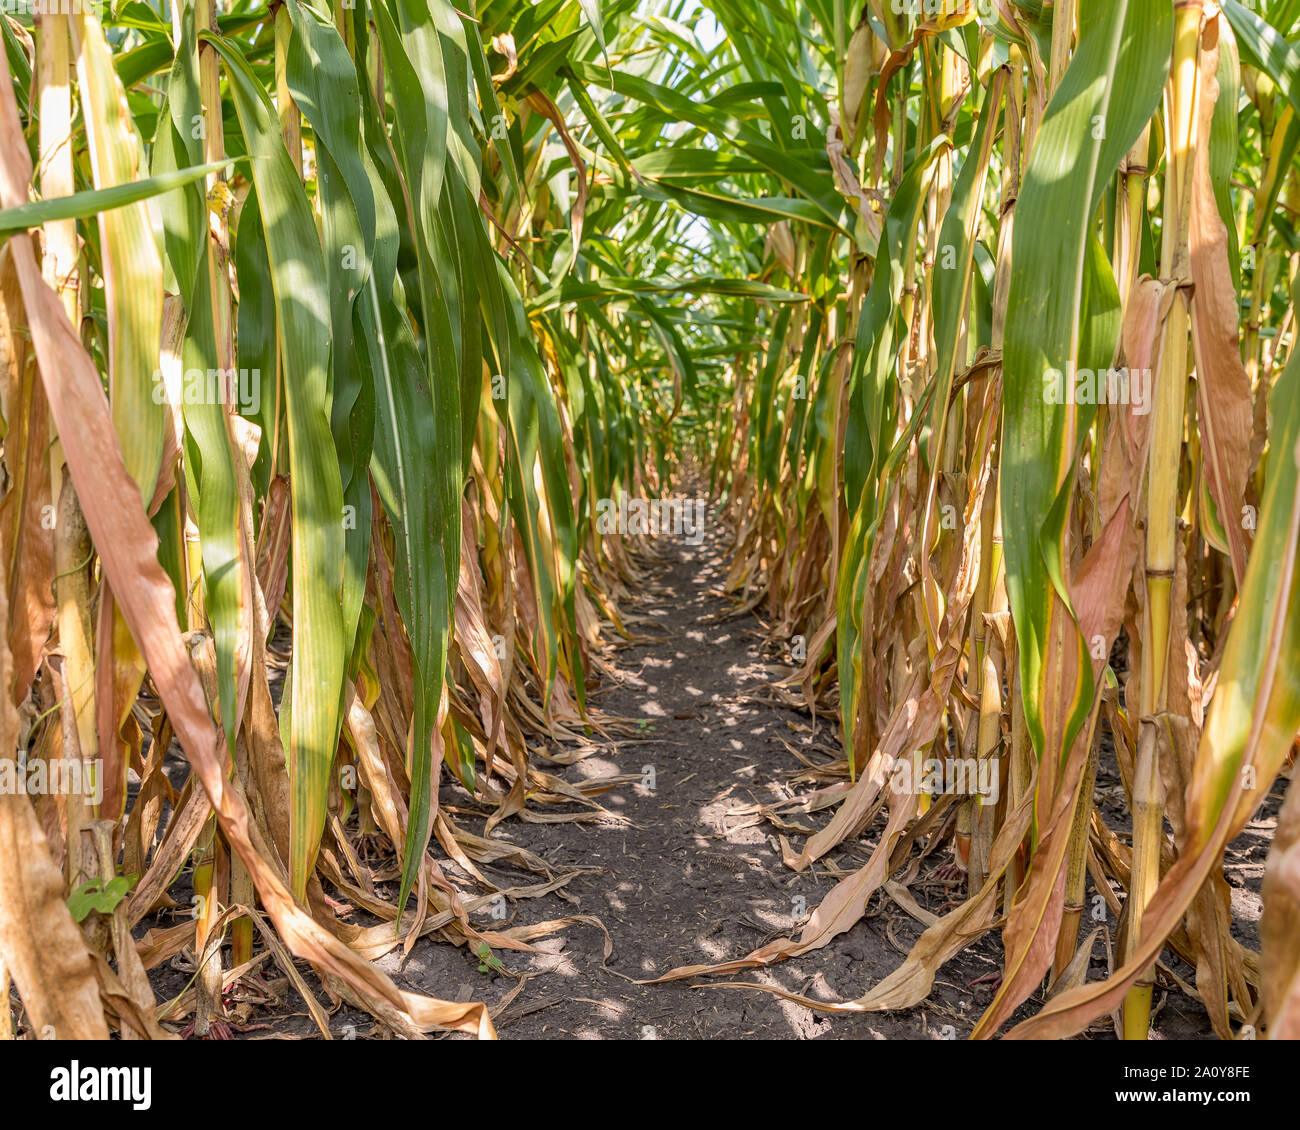 View from inside of cornfield under canopy of corn leafs looking down rows of cornstalks changing color as fall harvest season approaches Stock Photo